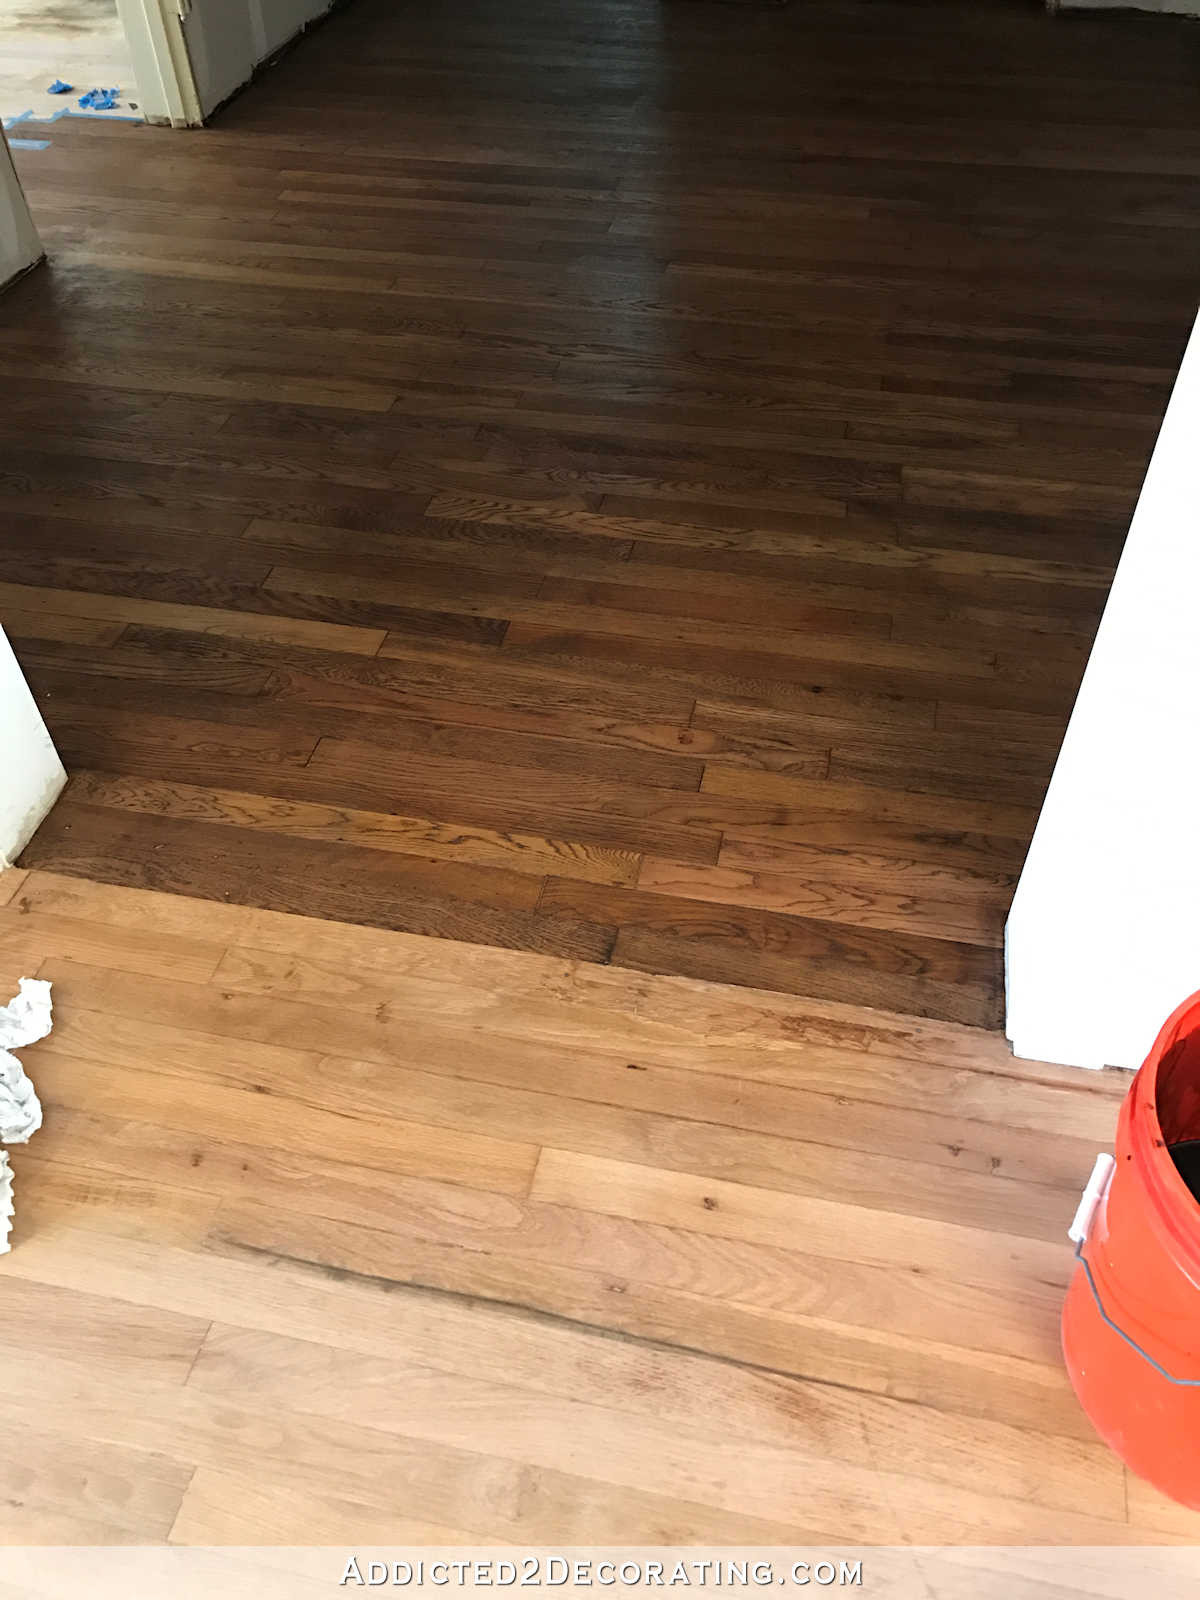 18 Famous How Do You Refinish Hardwood Floors Yourself 2024 free download how do you refinish hardwood floors yourself of adventures in staining my red oak hardwood floors products process regarding staining red oak hardwood floors 2 tape off one section at a time